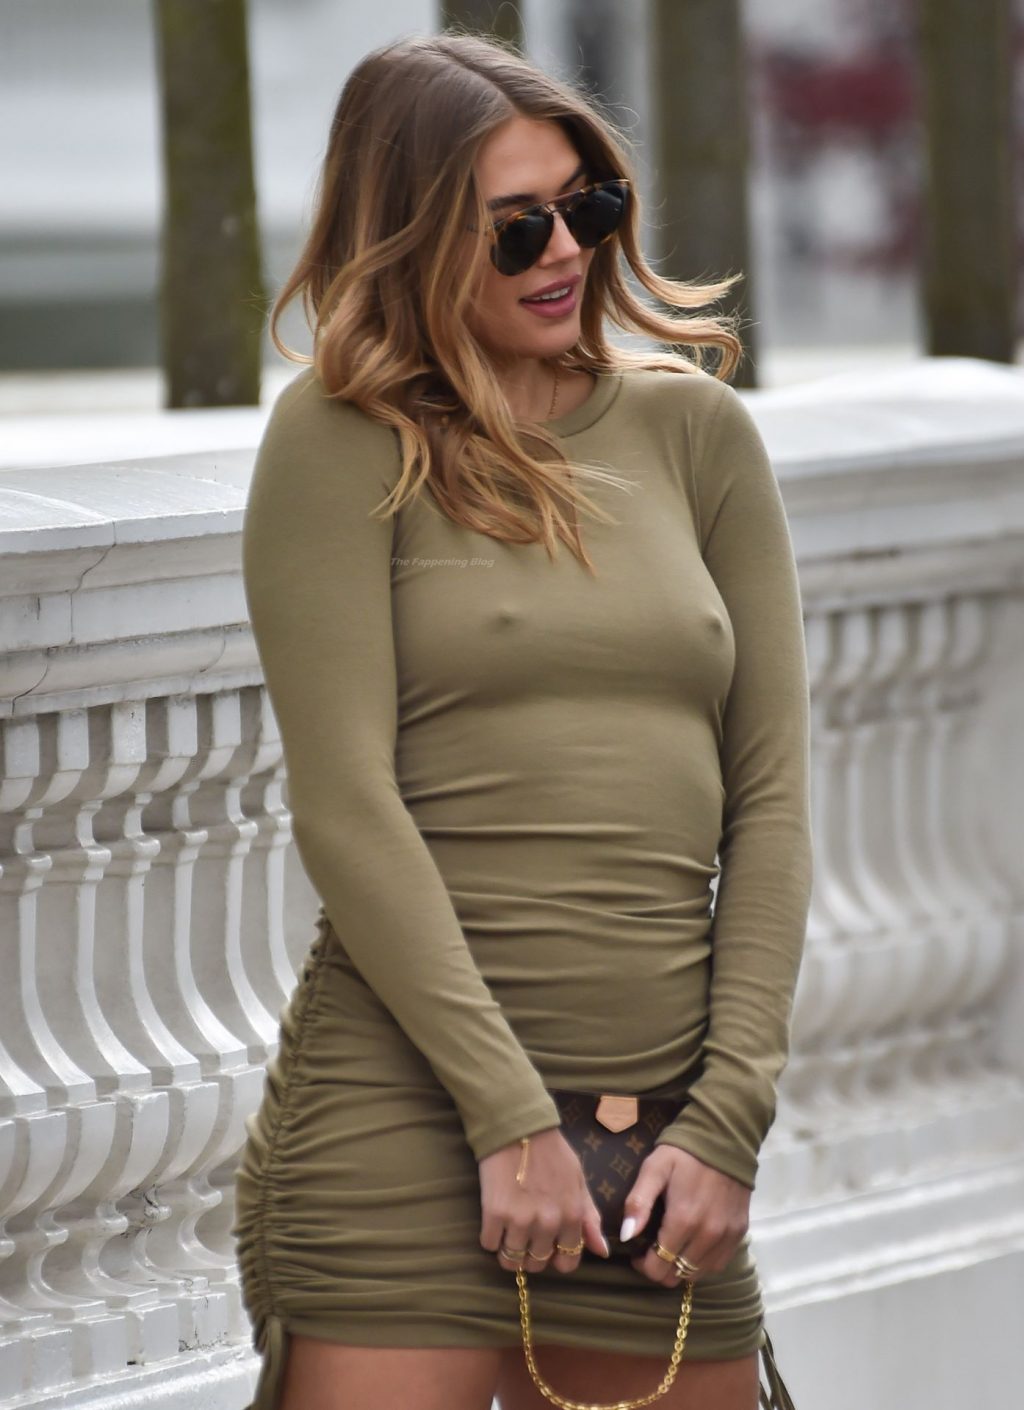 Arabella Chi is Seen Braless in a Green Dress on the Streets of London (21 Photos)